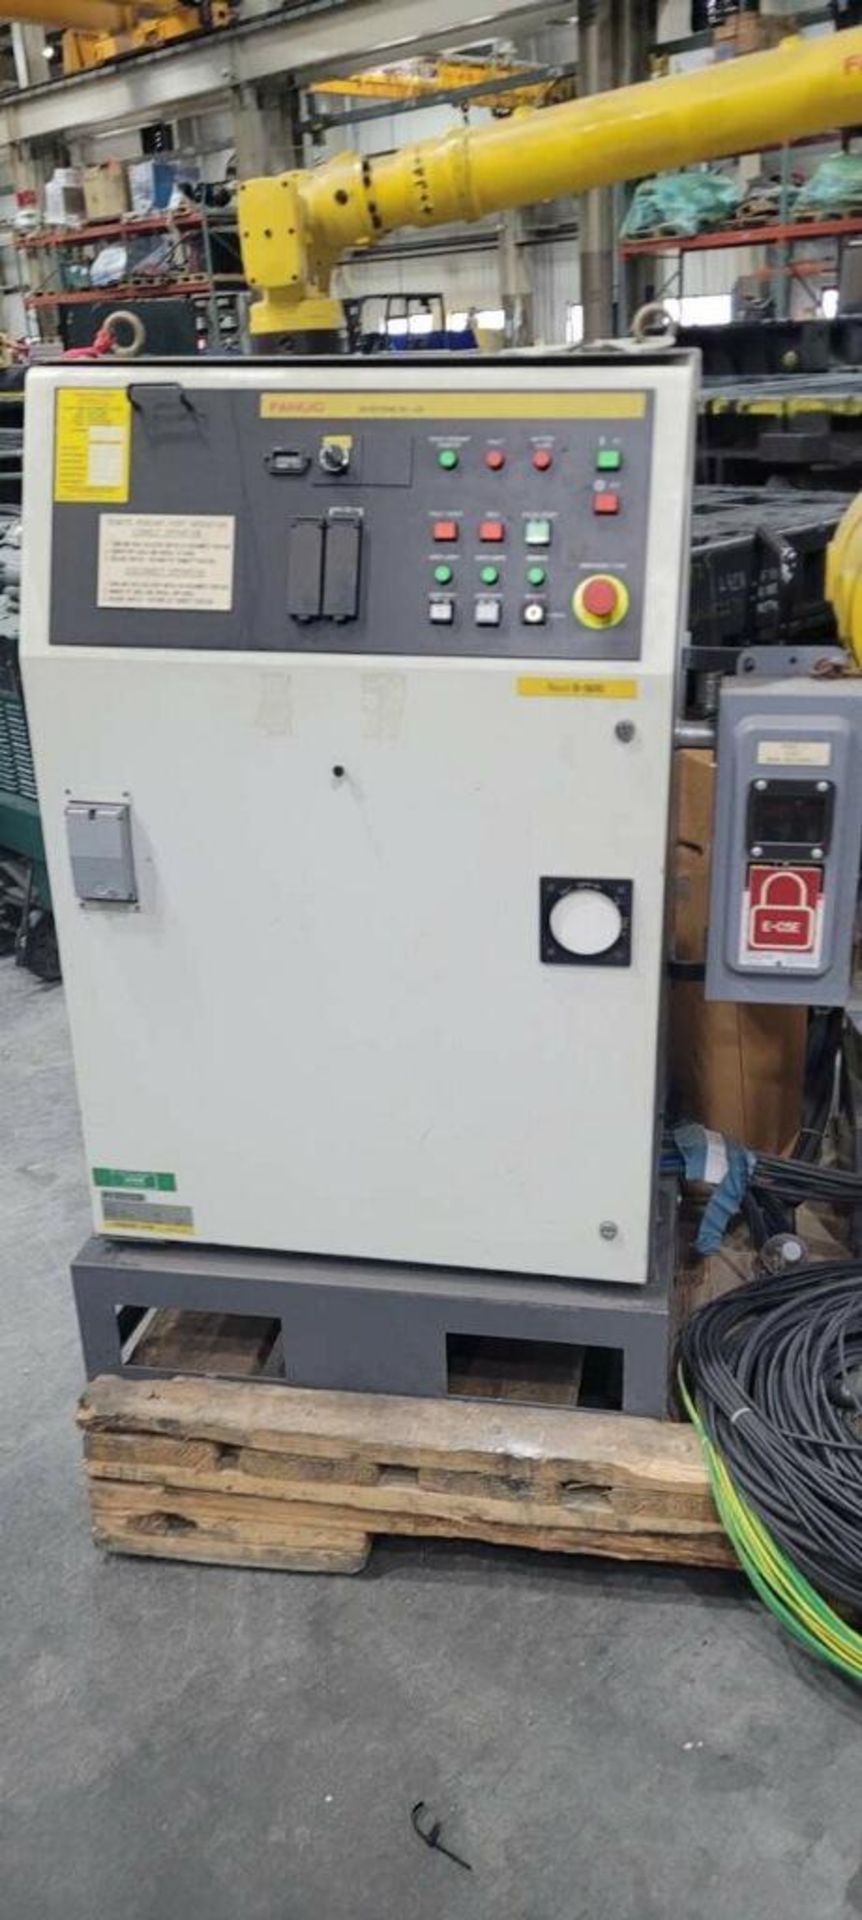 FANUC S500 ROBOT RJ2 CONTROLLER / (RCC Cables, Teach Pendant) / Located At: 37 Murray Dr, Tullahoma, - Image 2 of 4